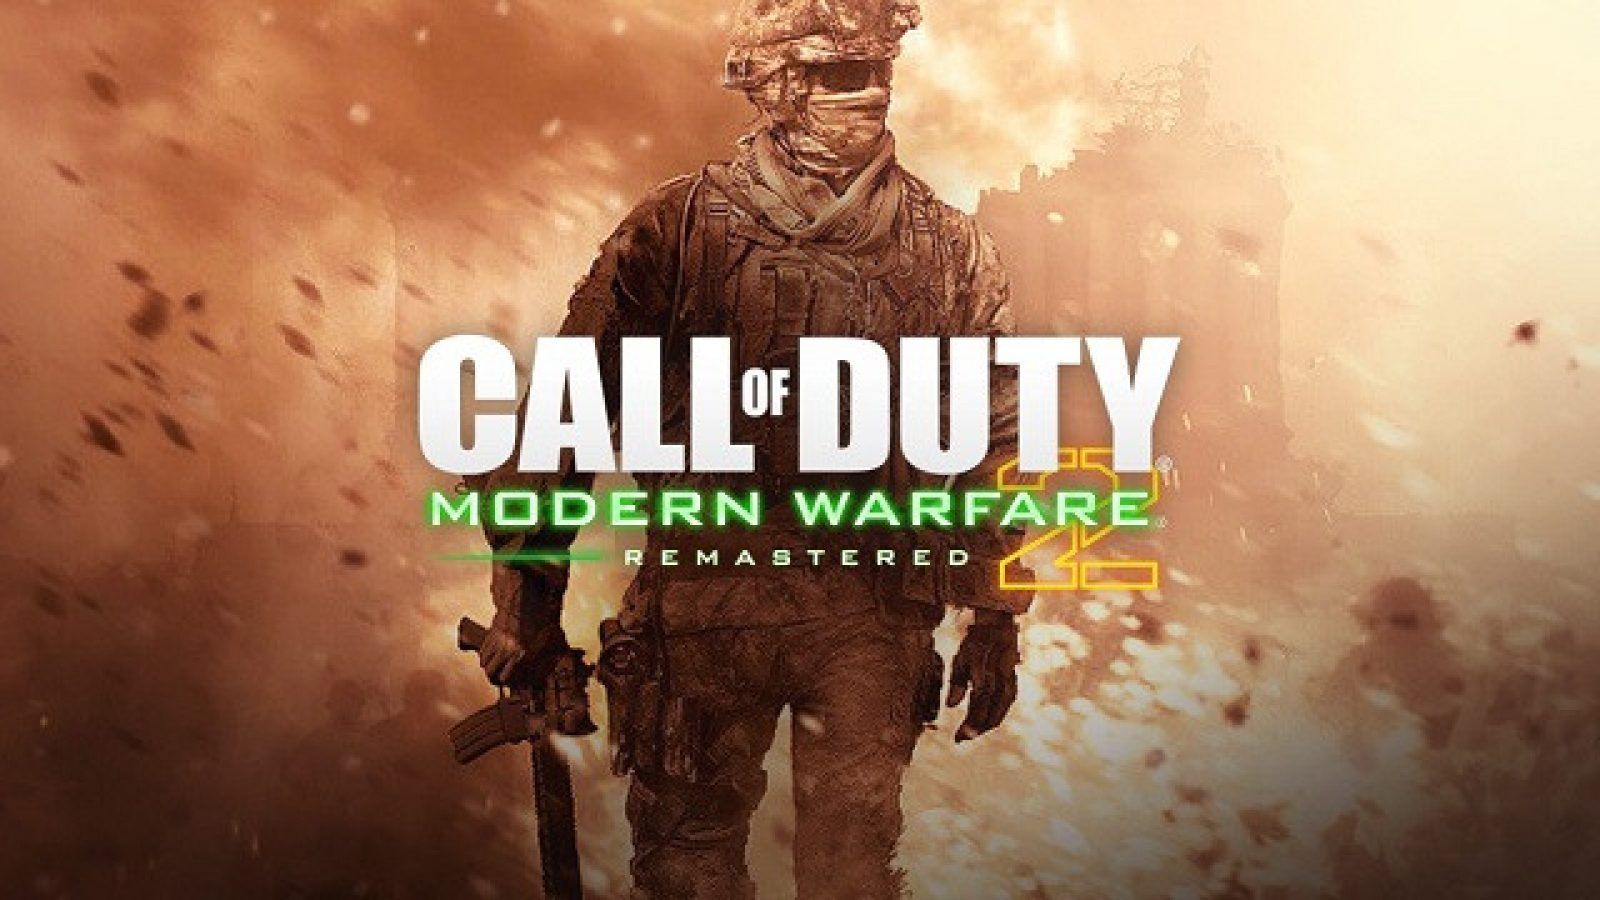 Call of Duty Modern Warfare Remastered, HD Games, 4k Wallpapers